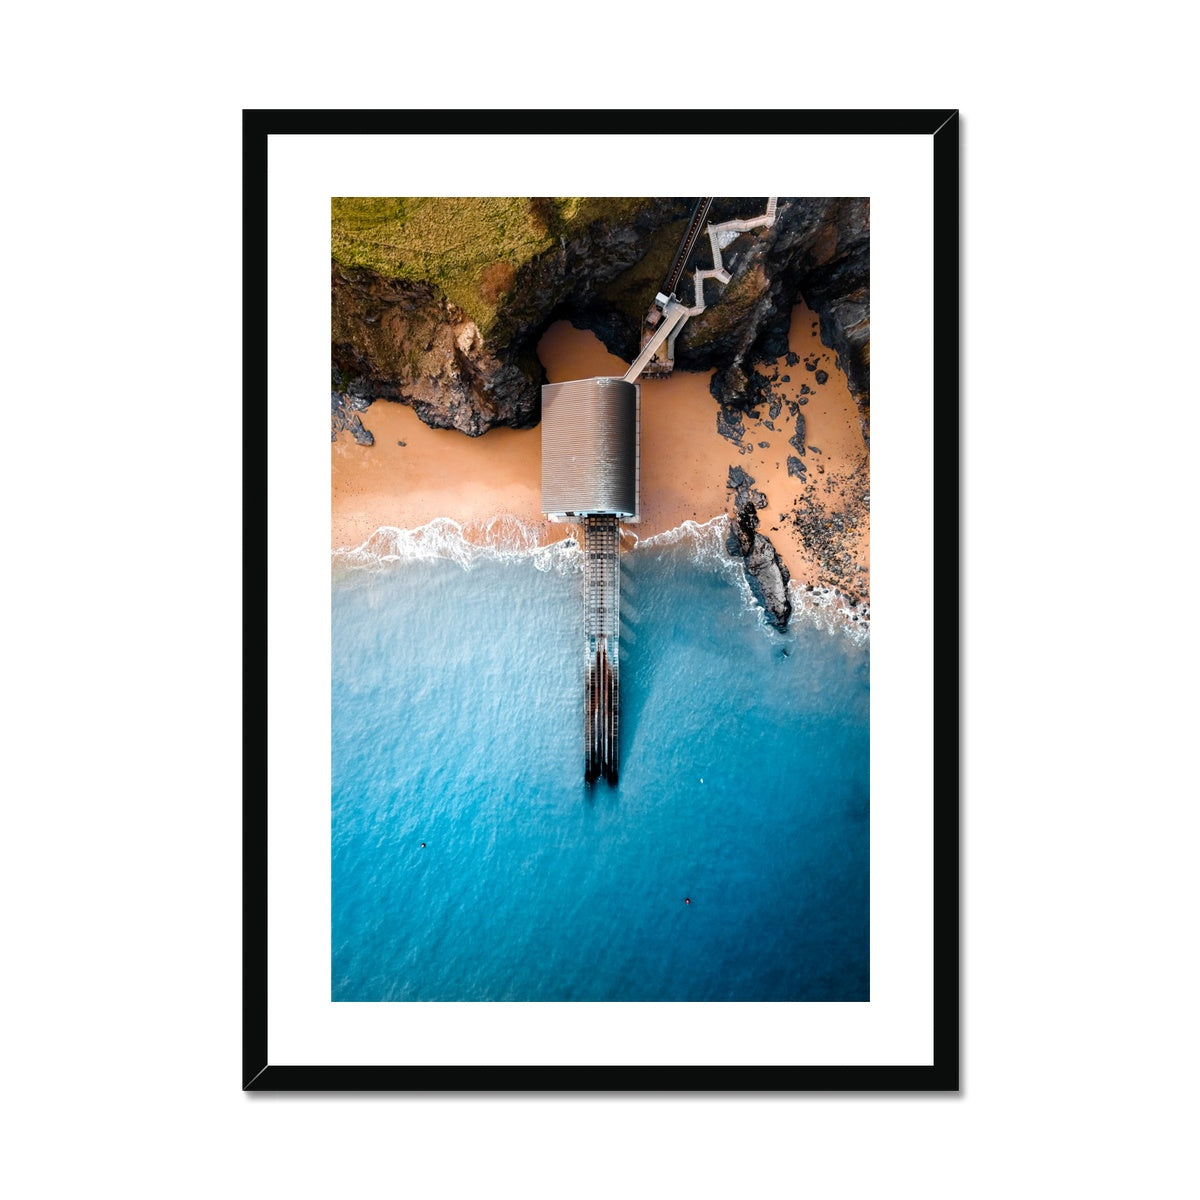 padstow lifeboard station from above framed print